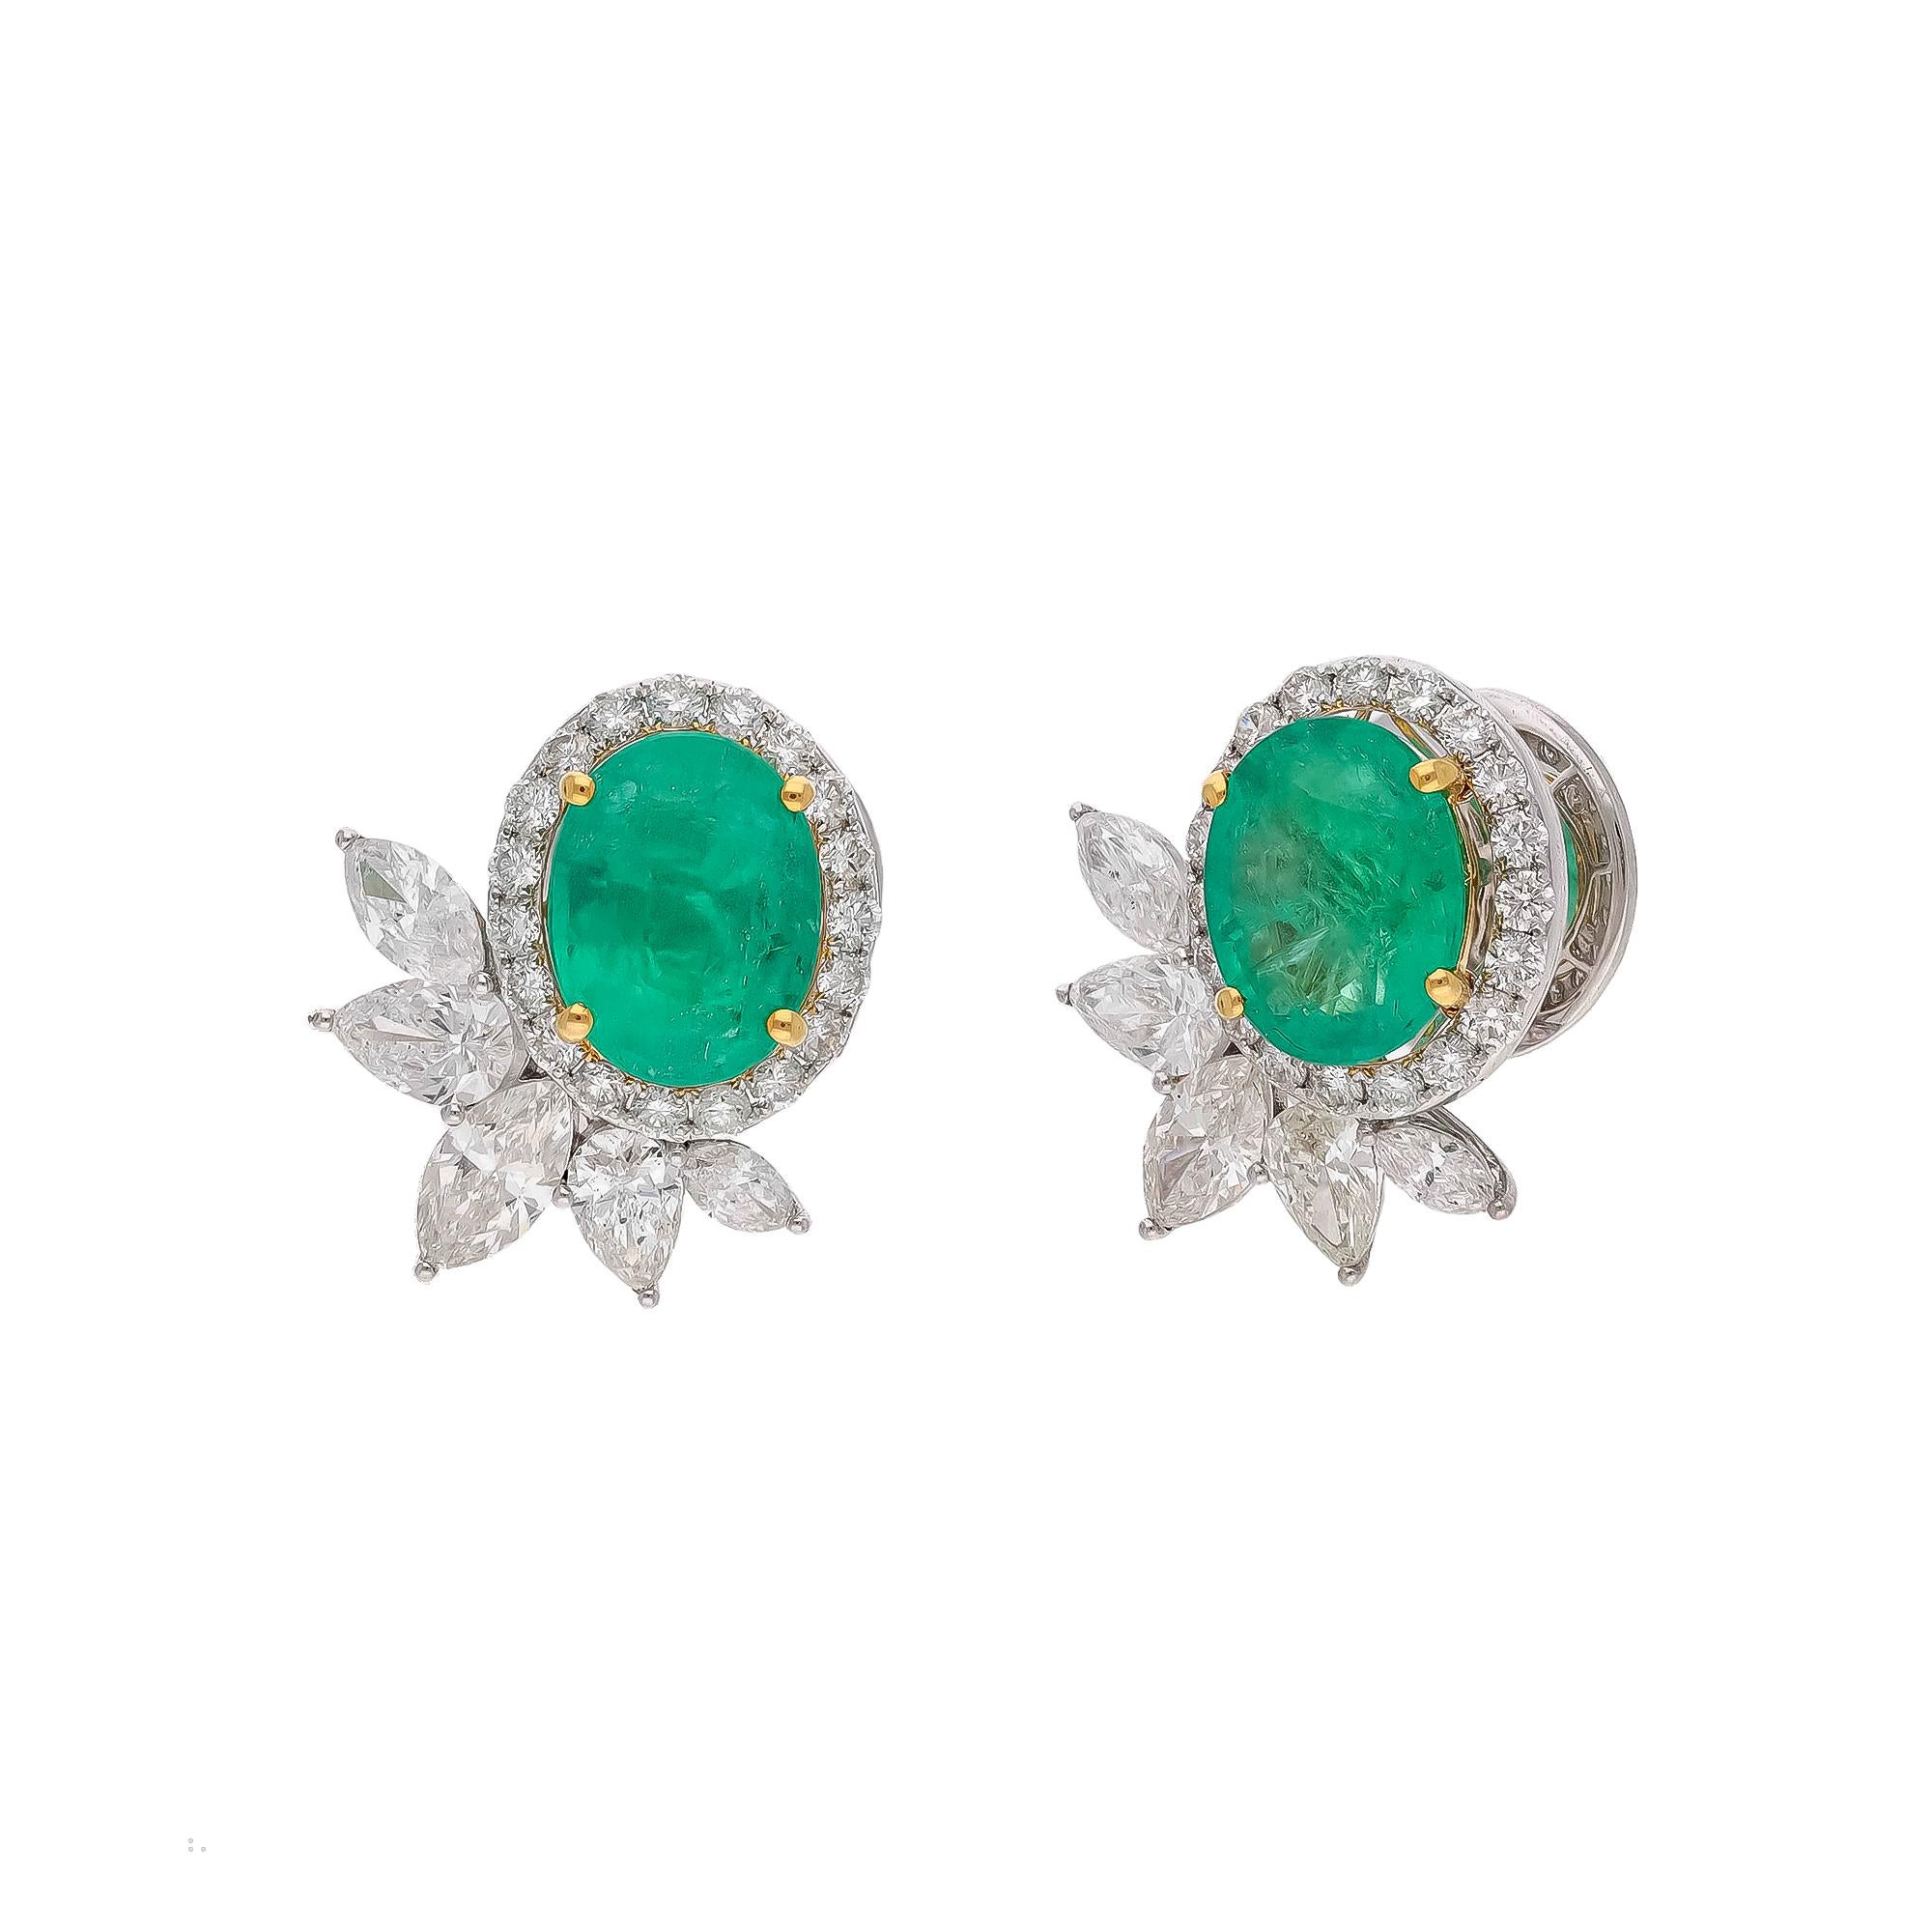 Diamonds : 2.19 carats
Emerald : 3.53 carats
Gold : 5.19 gm( 18k)

This is a beautiful earrings with very high quality emeralds and diamonds ( vsi and G colour

Its very hard to capture the true color and luster of the stone, I have tried to add